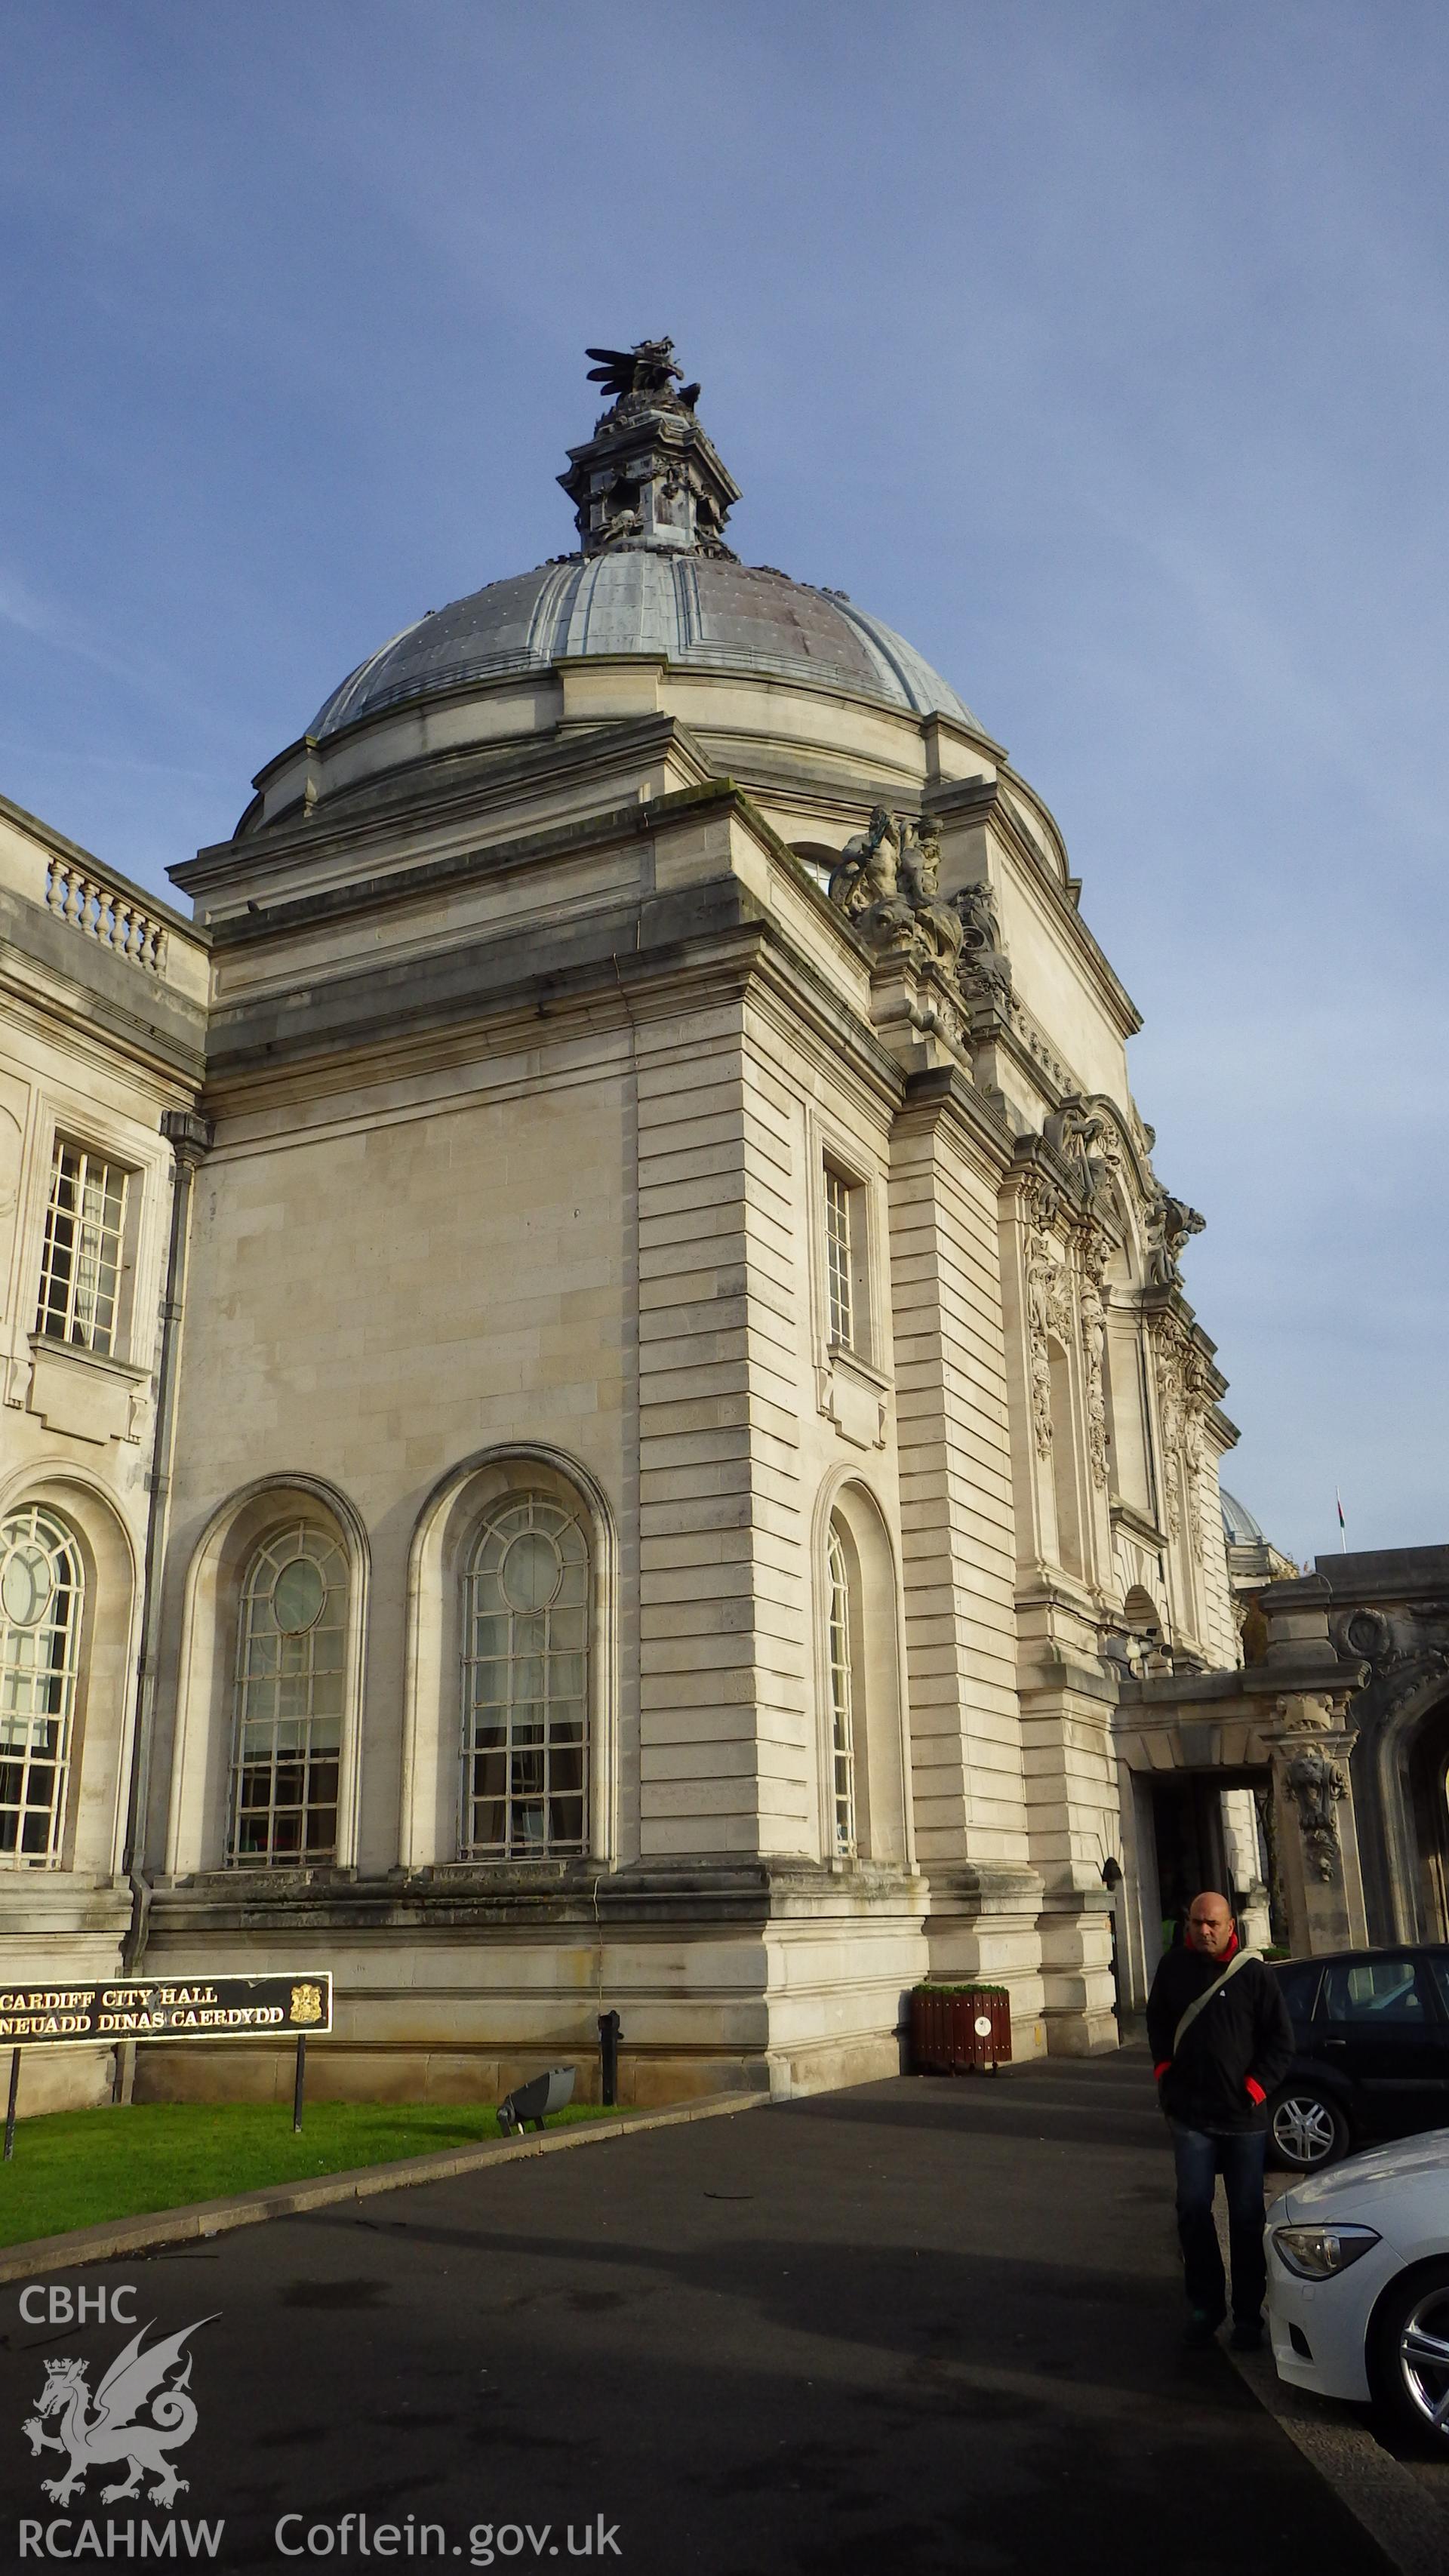 External view of Cardiff City Hall